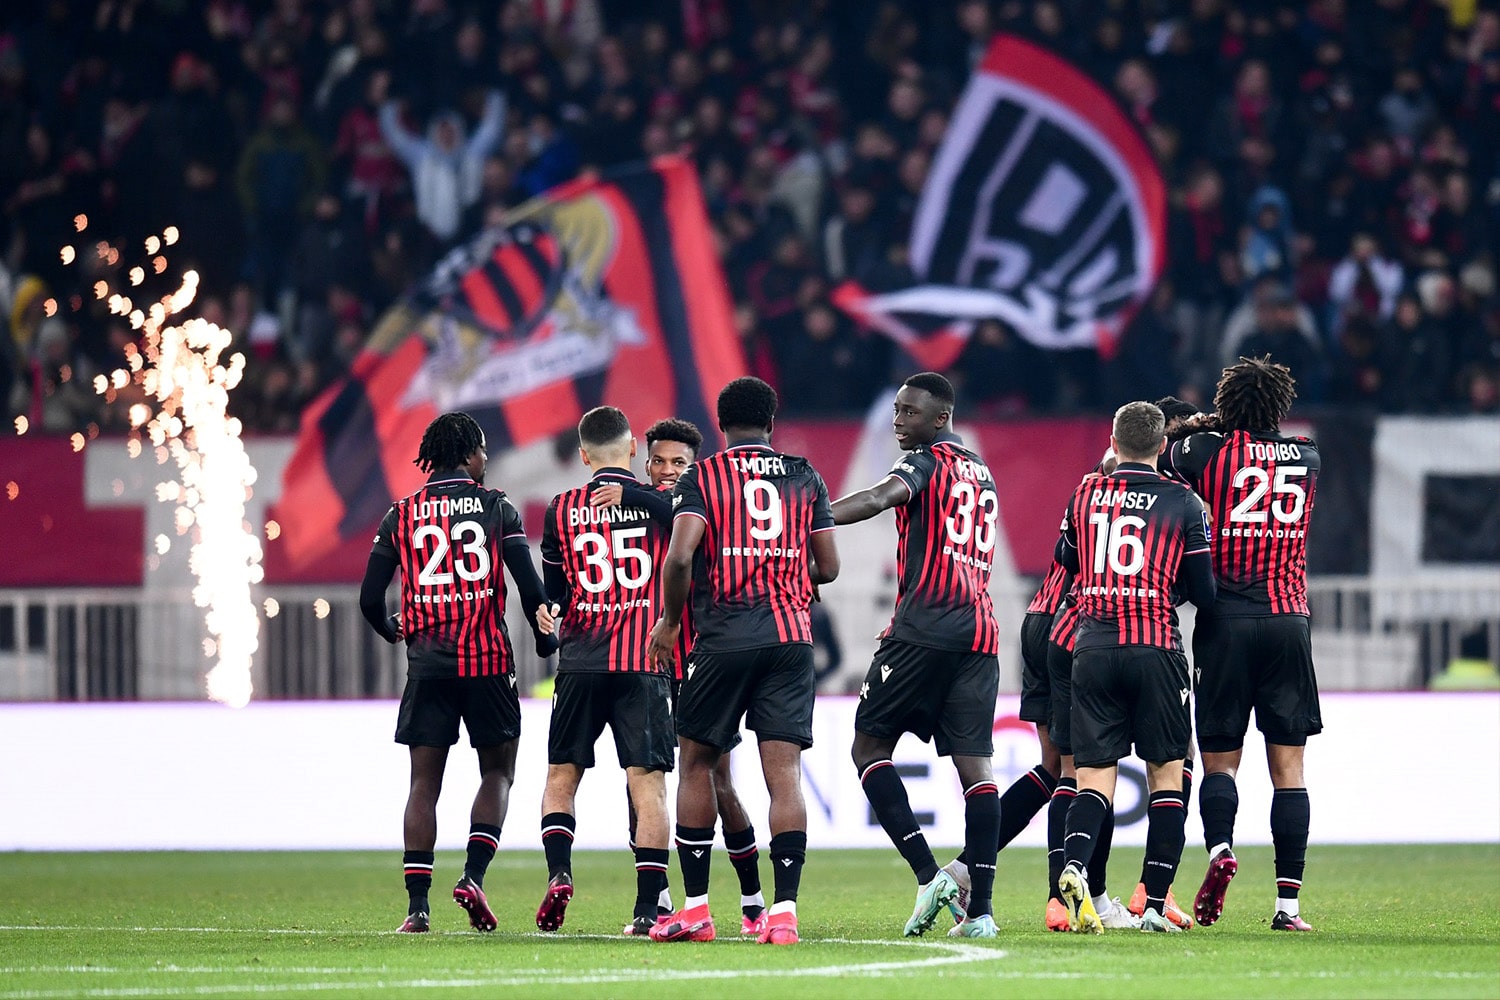 Players from Daniel Ratcliffe's club, OGC Nice, gather together on field during a home match